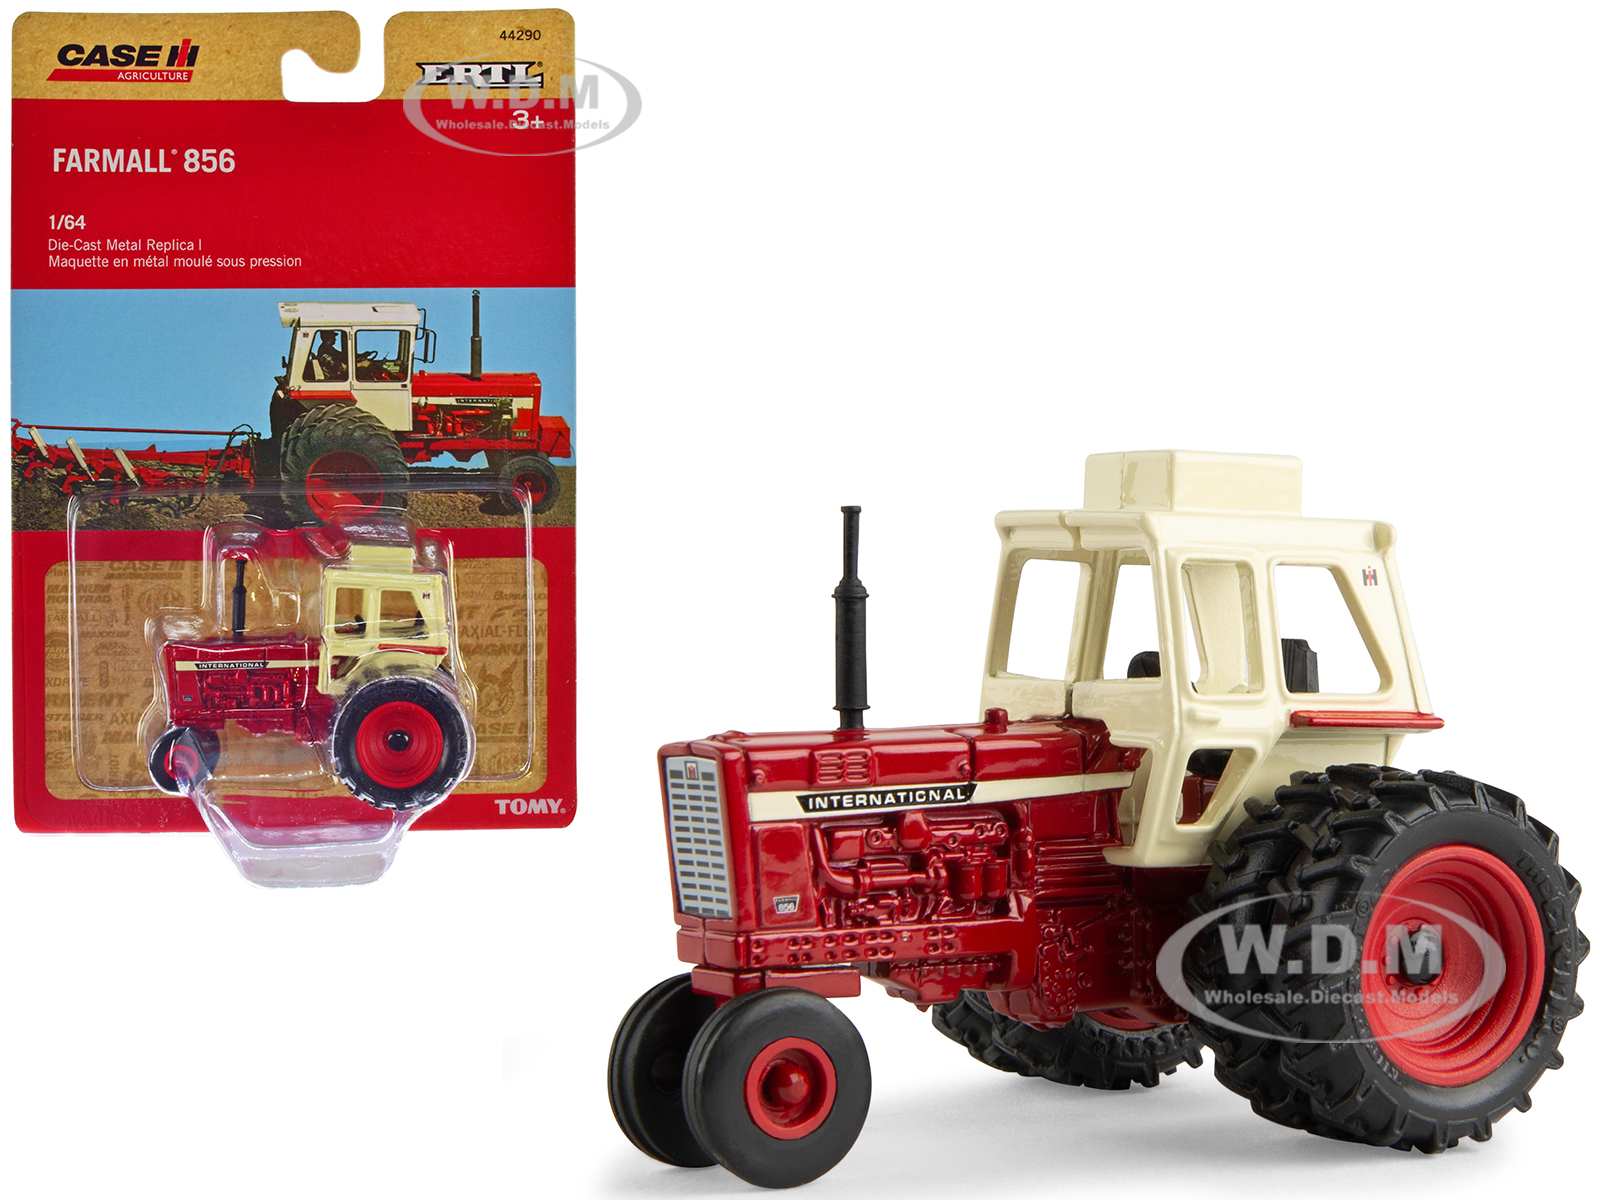 Farmall 856 Tractor Red With Cream Top With Dual Wheels Case IH Agriculture 1/64 Diecast Model By ERTL TOMY